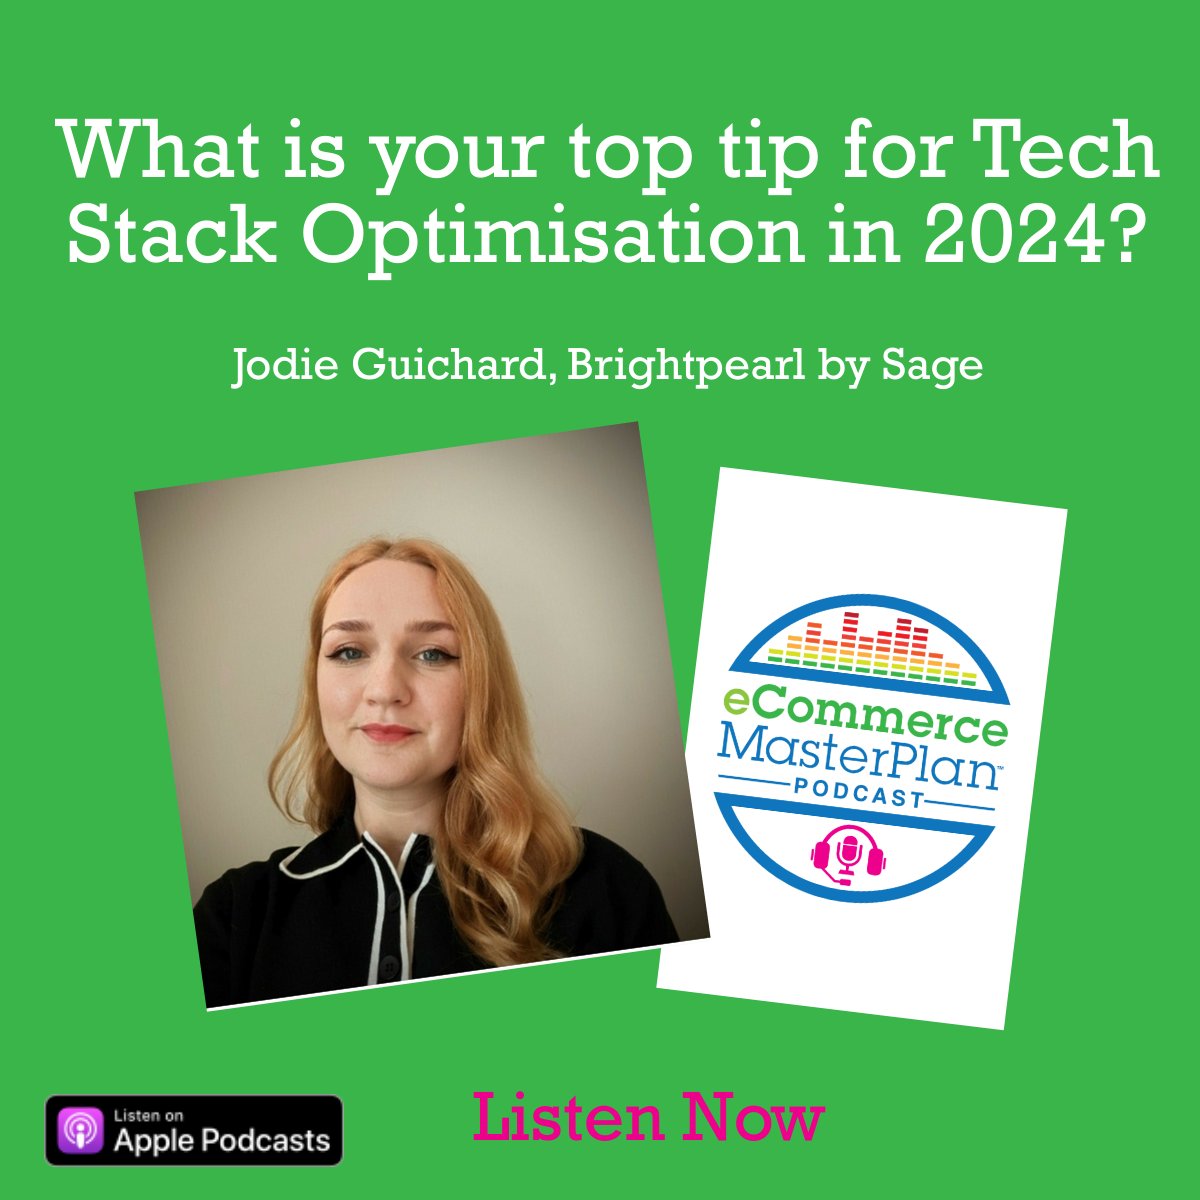 Hear Jodie’s full Top Tip for Tech Stack Optimisation in 2024 now! Listen on Apple Podcasts, Spotify or ecommercemasterplan.com/tech-stack-opt… @BrightpearlHQ